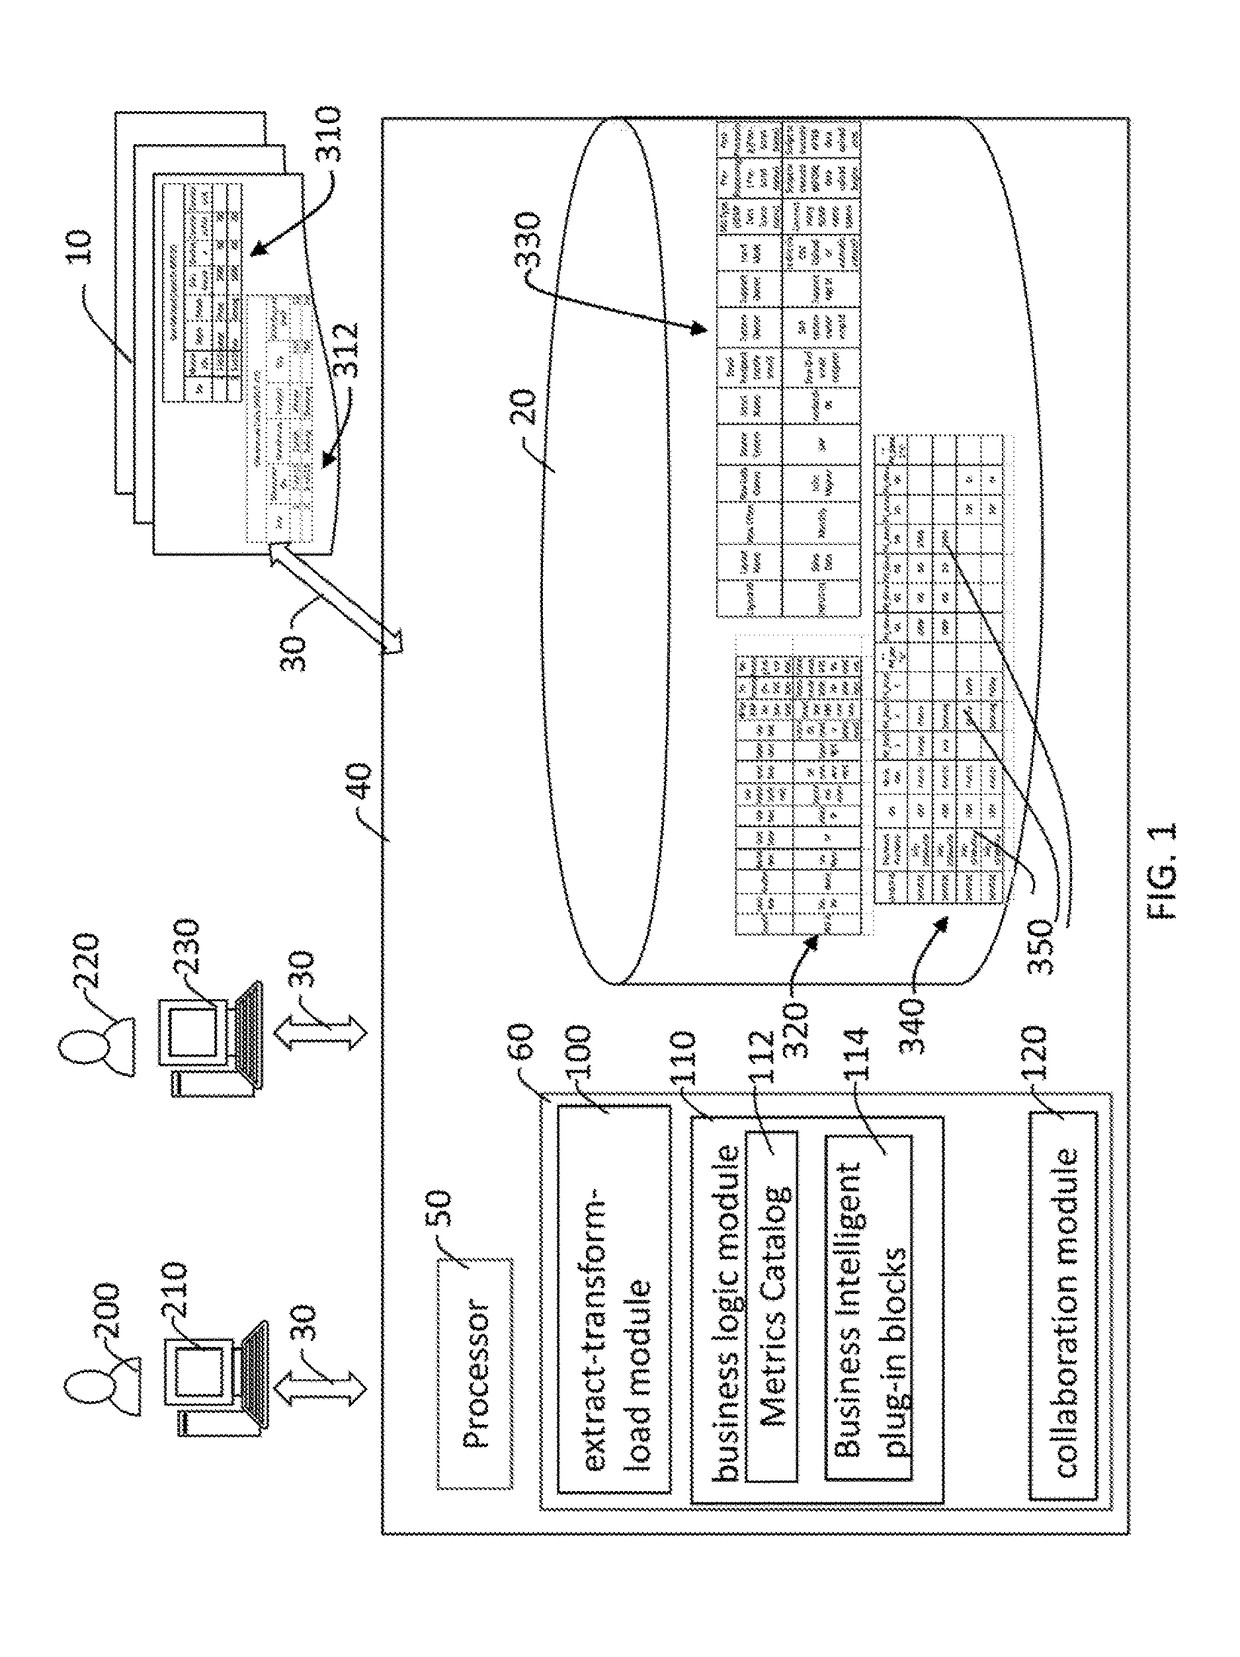 System and methods for integrated performance measurement environment